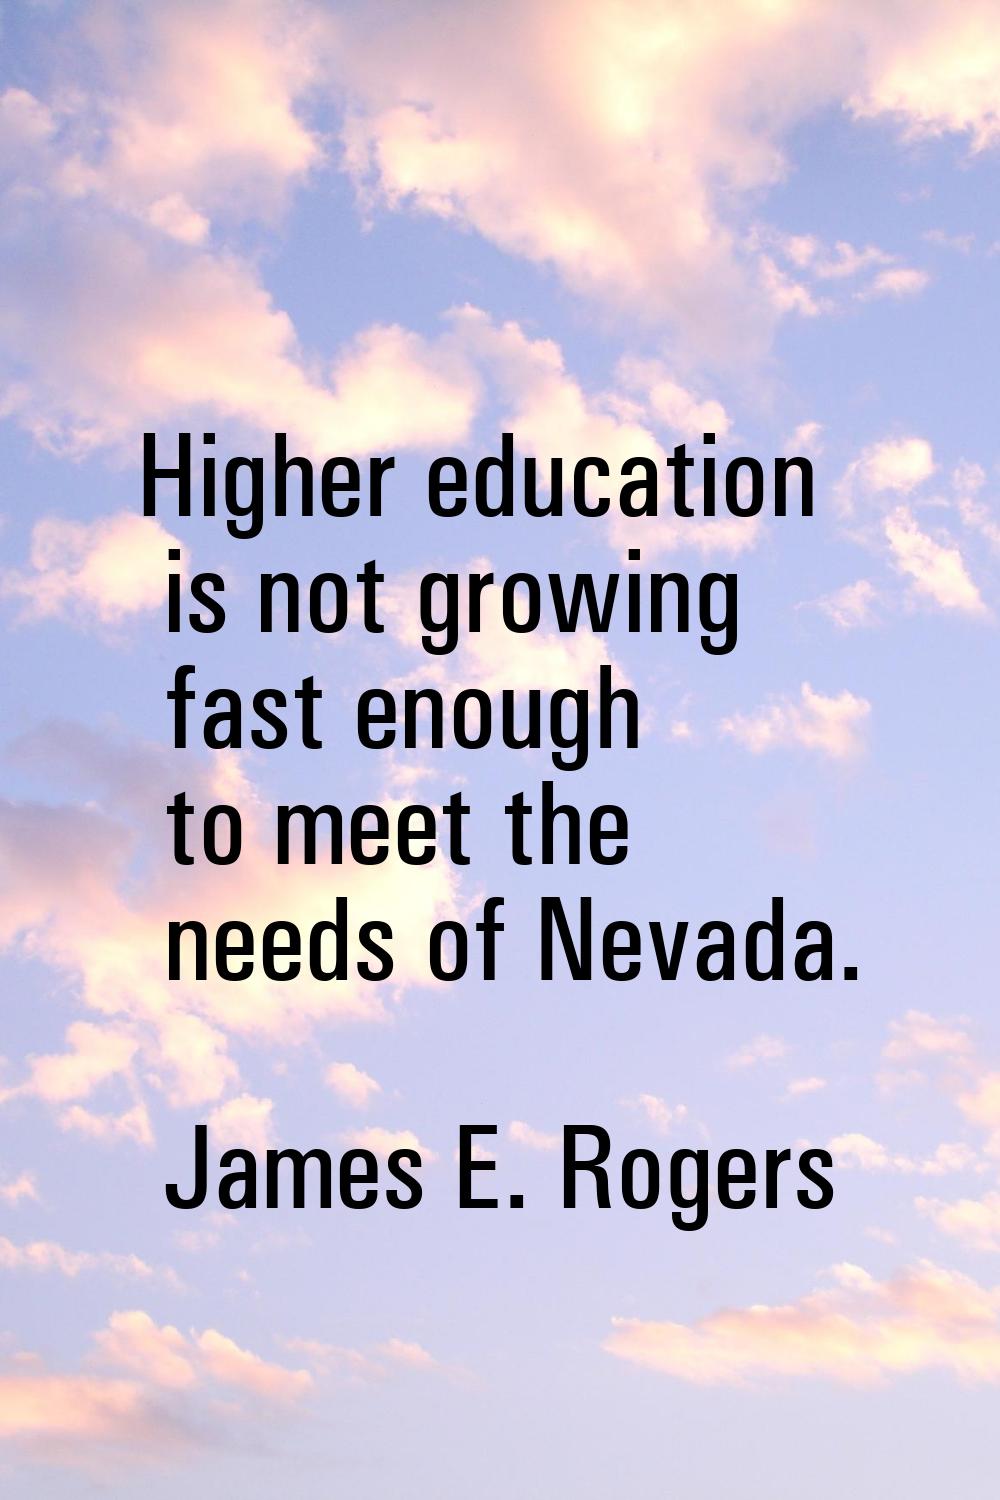 Higher education is not growing fast enough to meet the needs of Nevada.